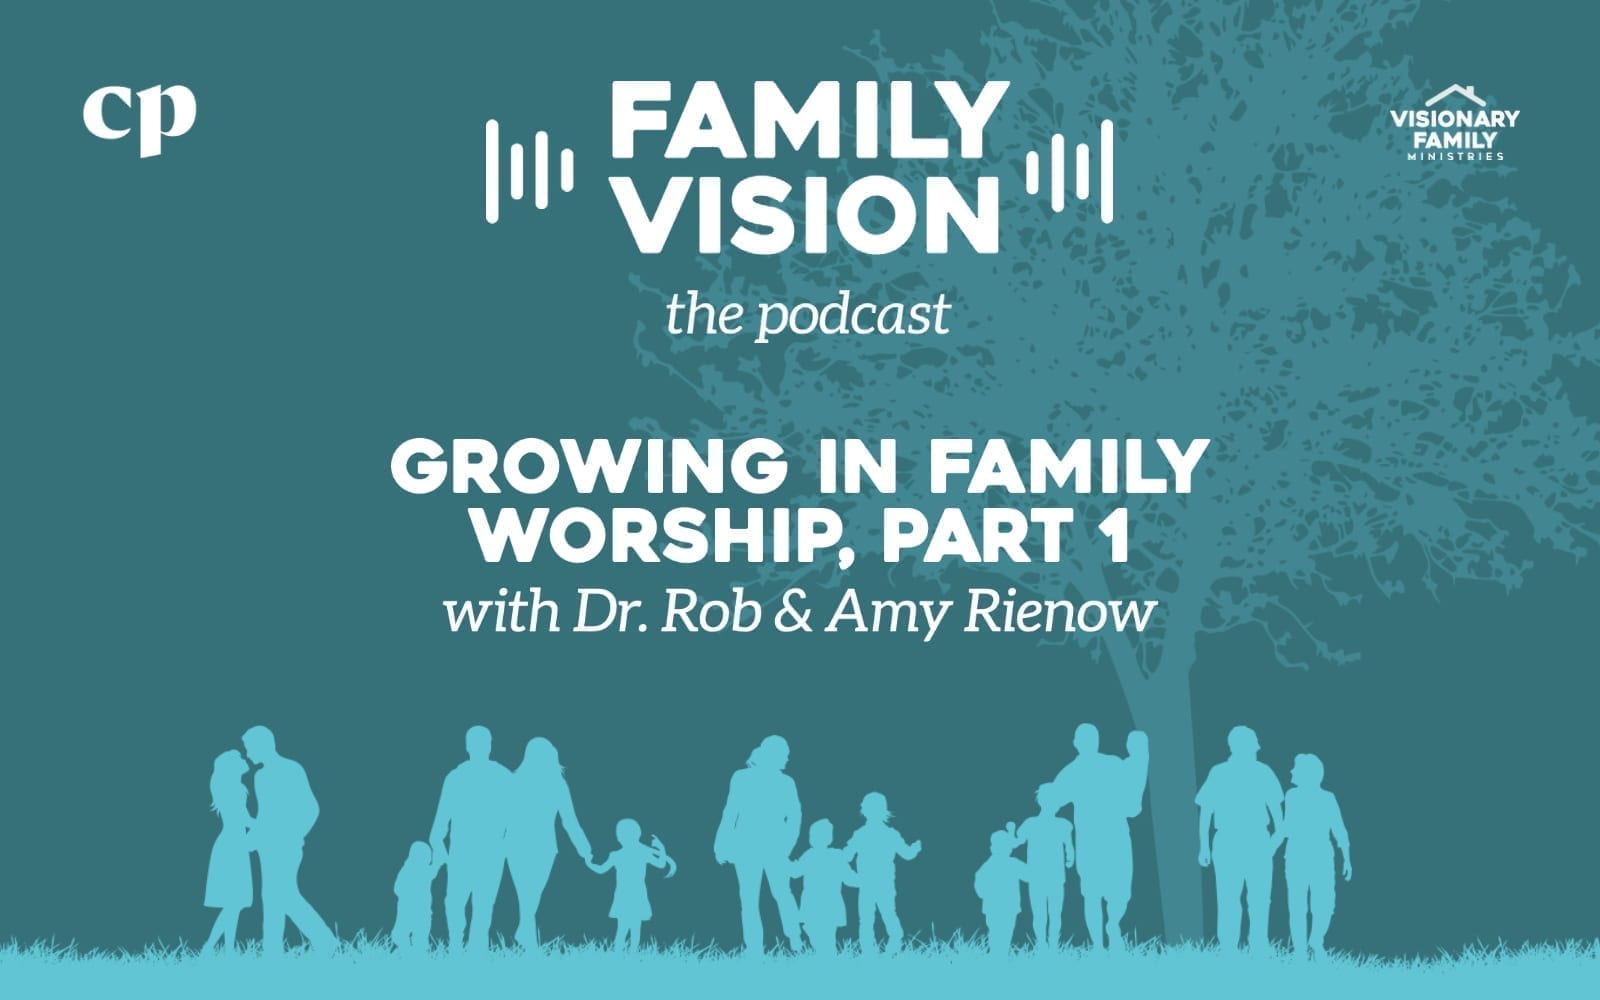 Growing in Family Worship, Part 1